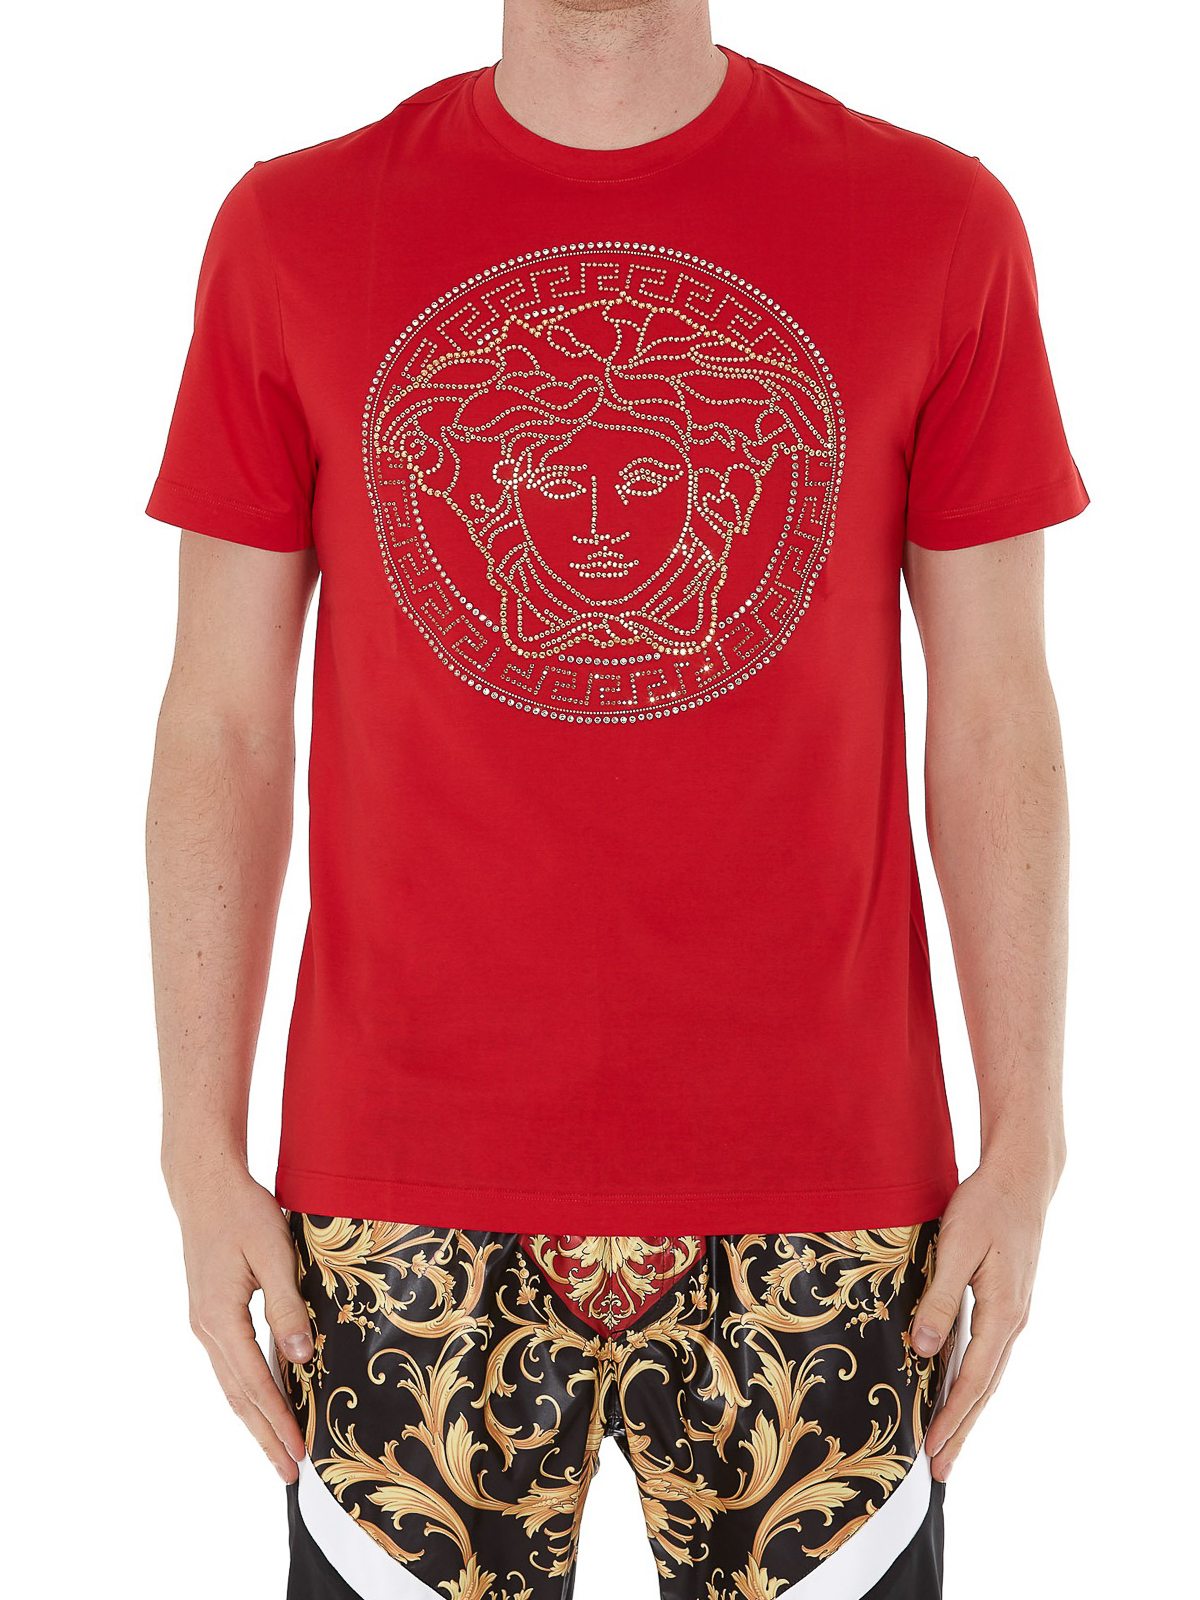 red and gold versace shirt